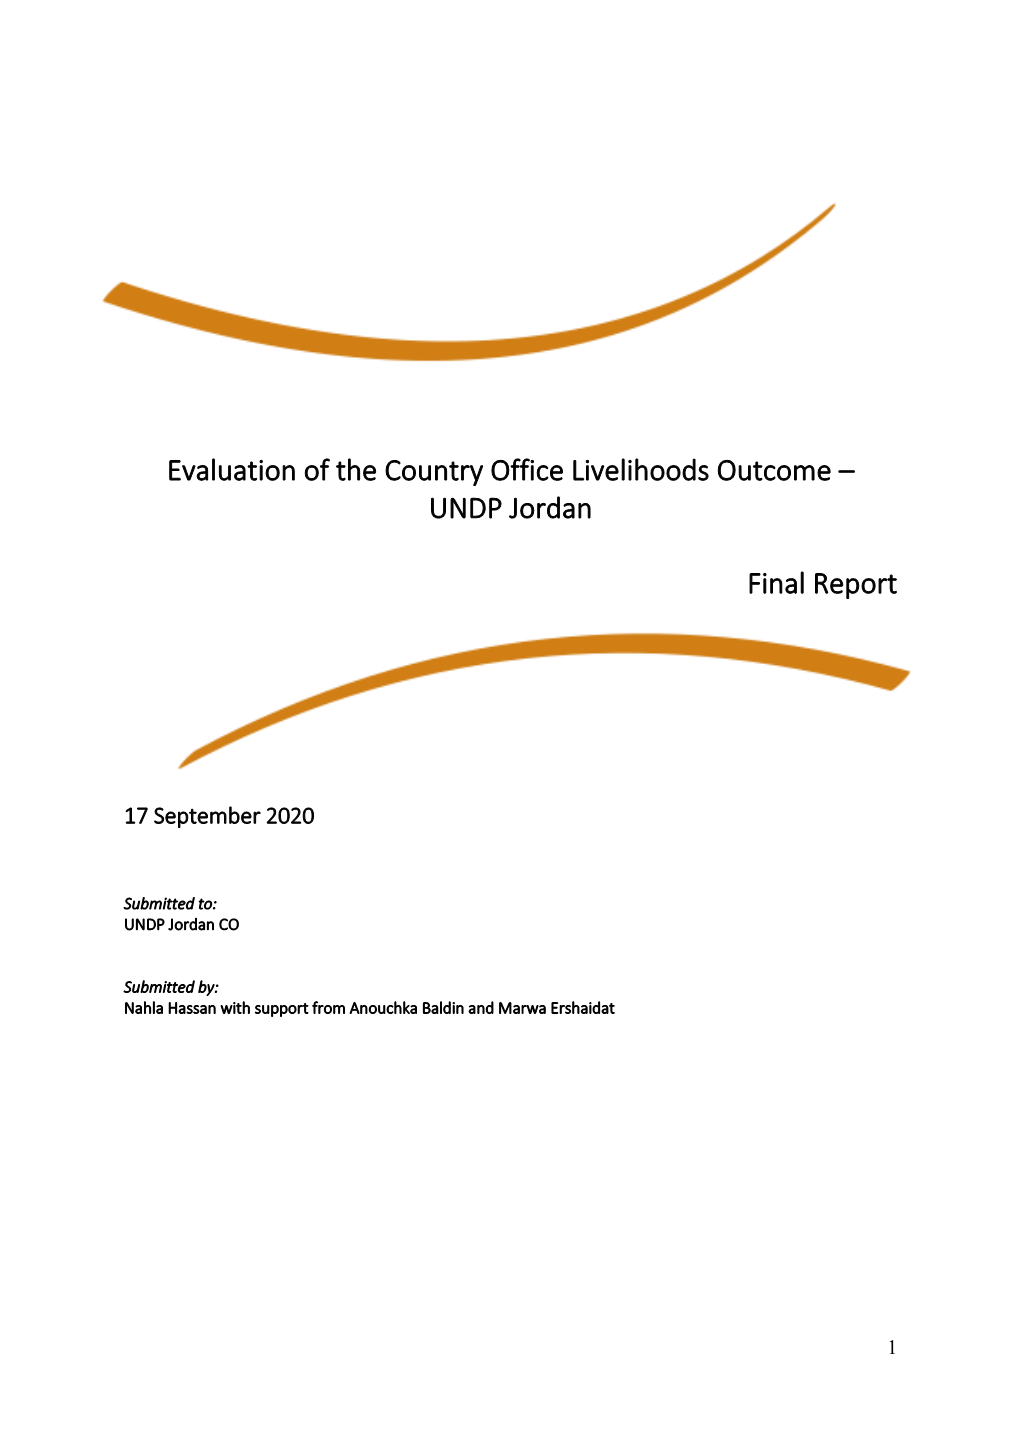 Evaluation of the Country Office Livelihoods Outcome – UNDP Jordan Final Report